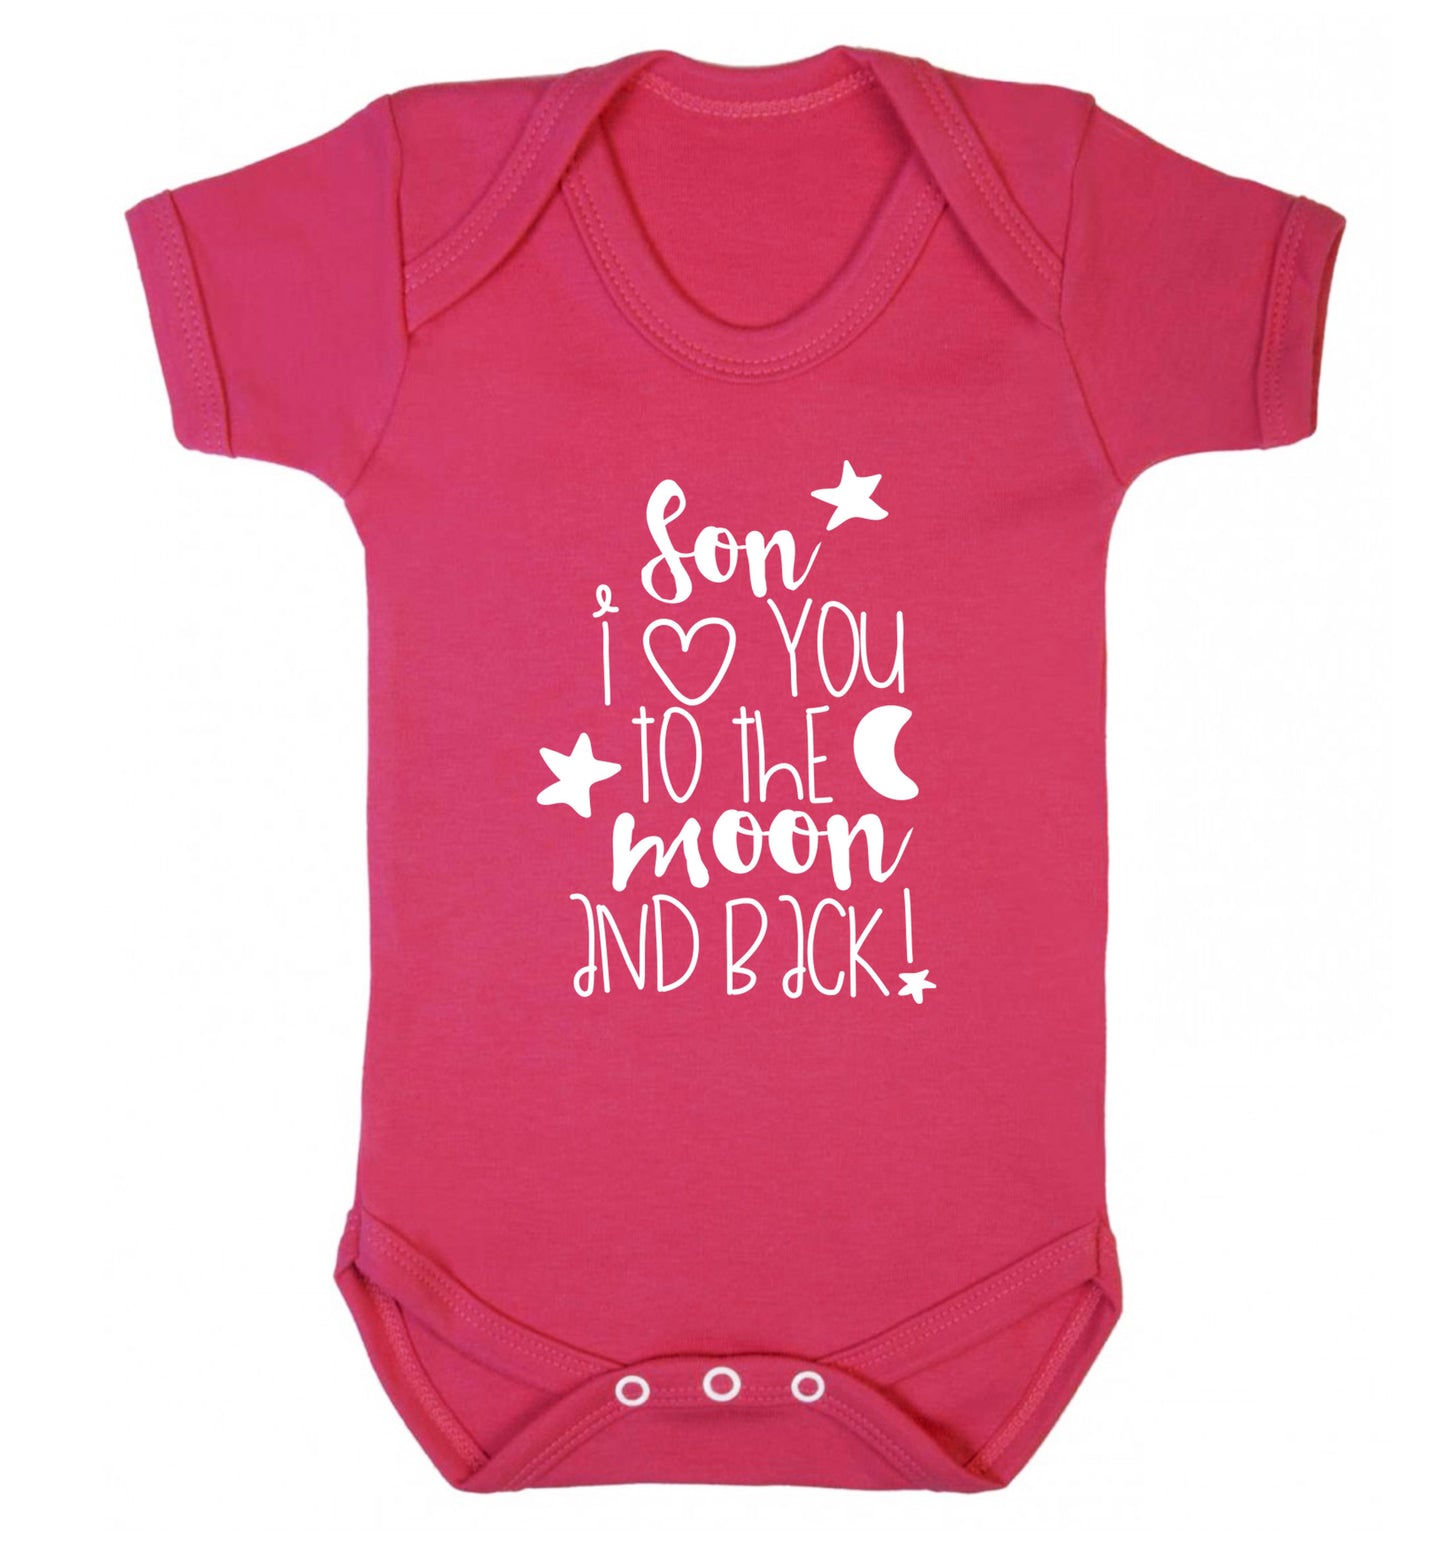 Son I love you to the moon and back Baby Vest dark pink 18-24 months